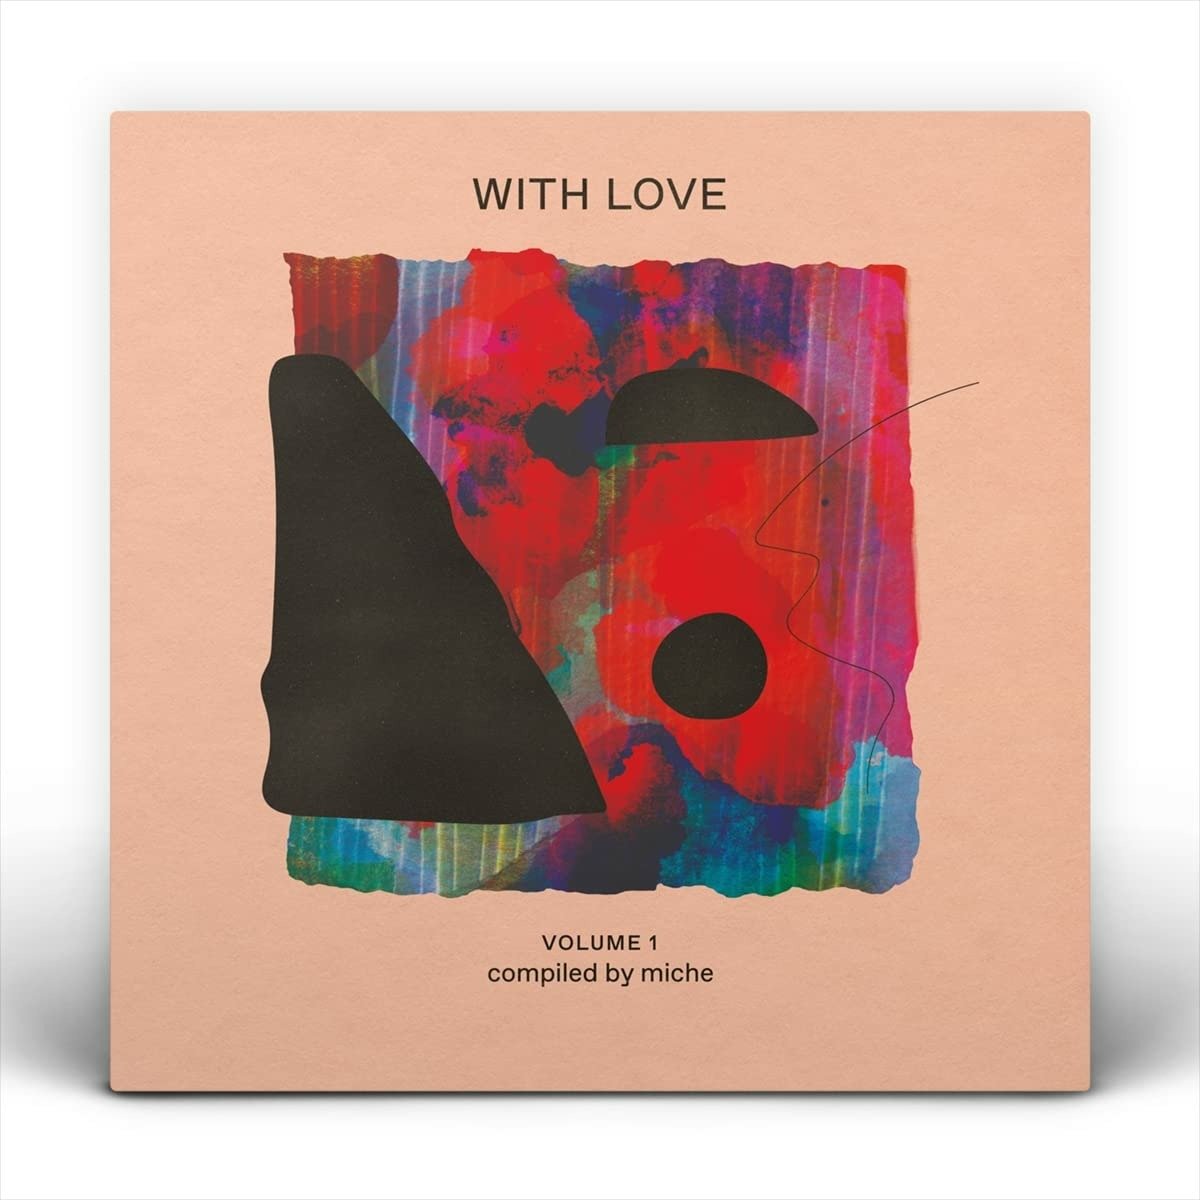 V/A - WITH LOVE: VOLUME 1 COMPILED BY MICHE, CD